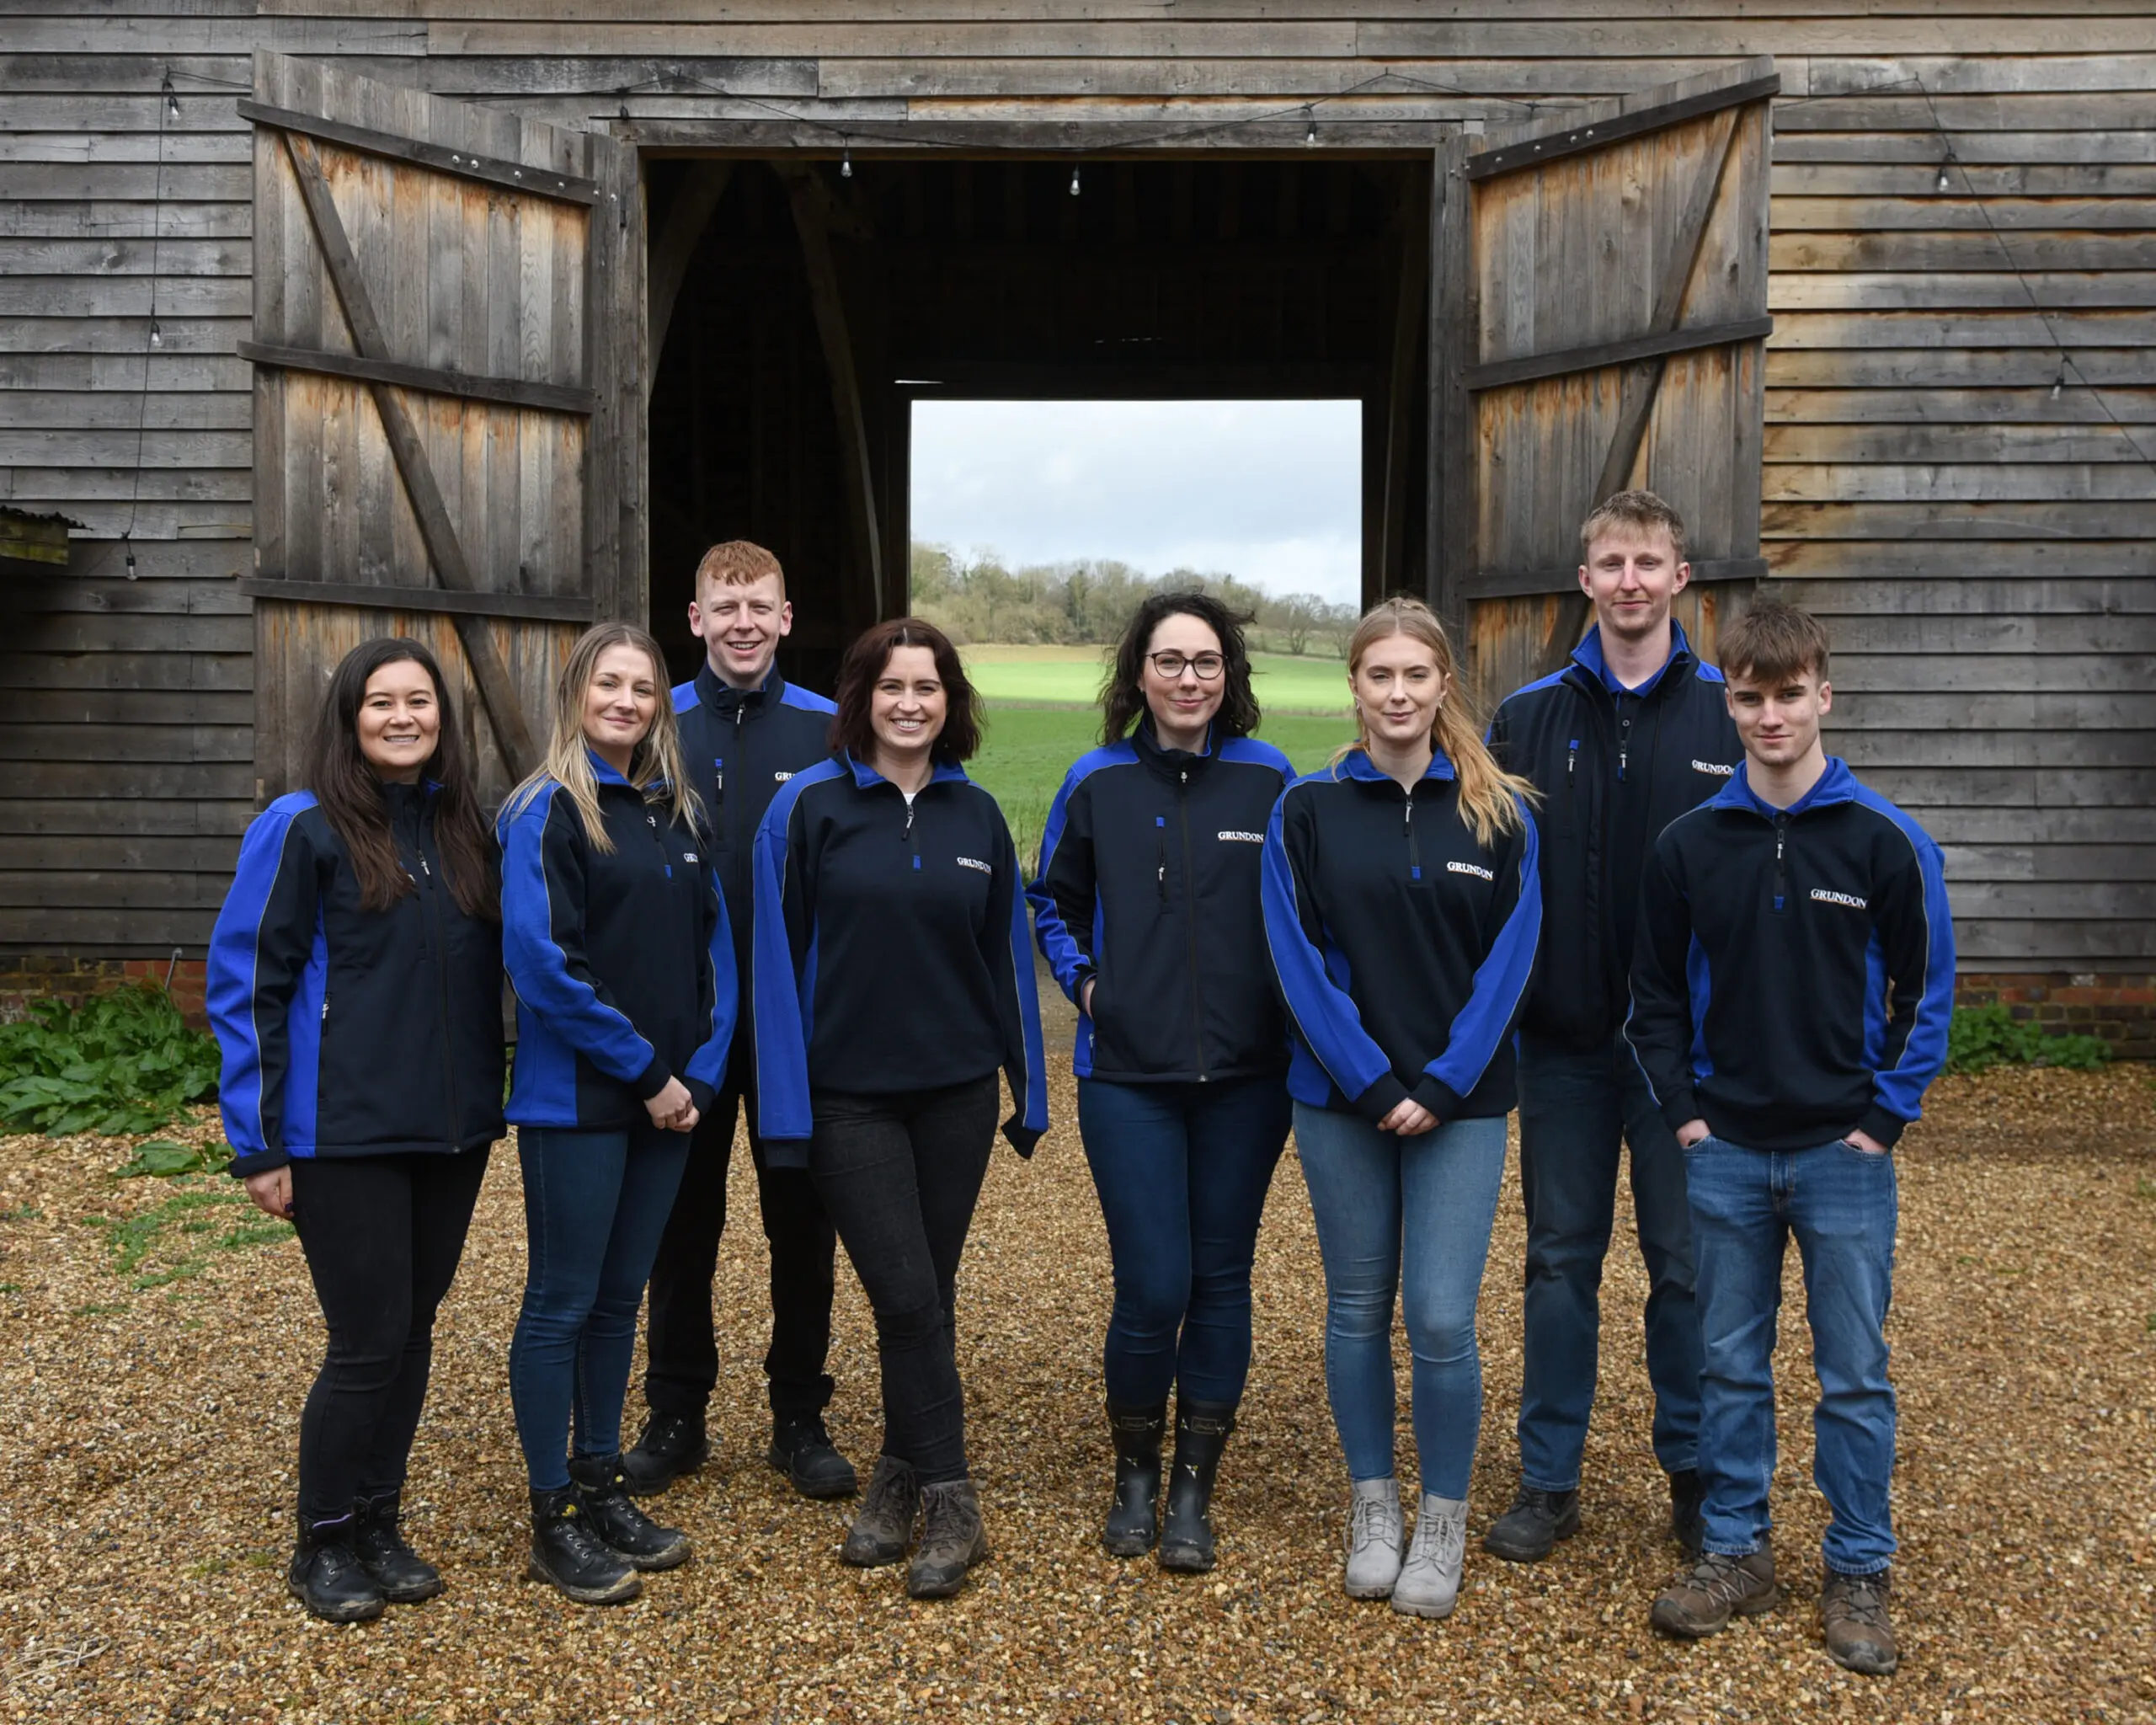 Ready for action - the Grundon volunteers in front of the new barn doors